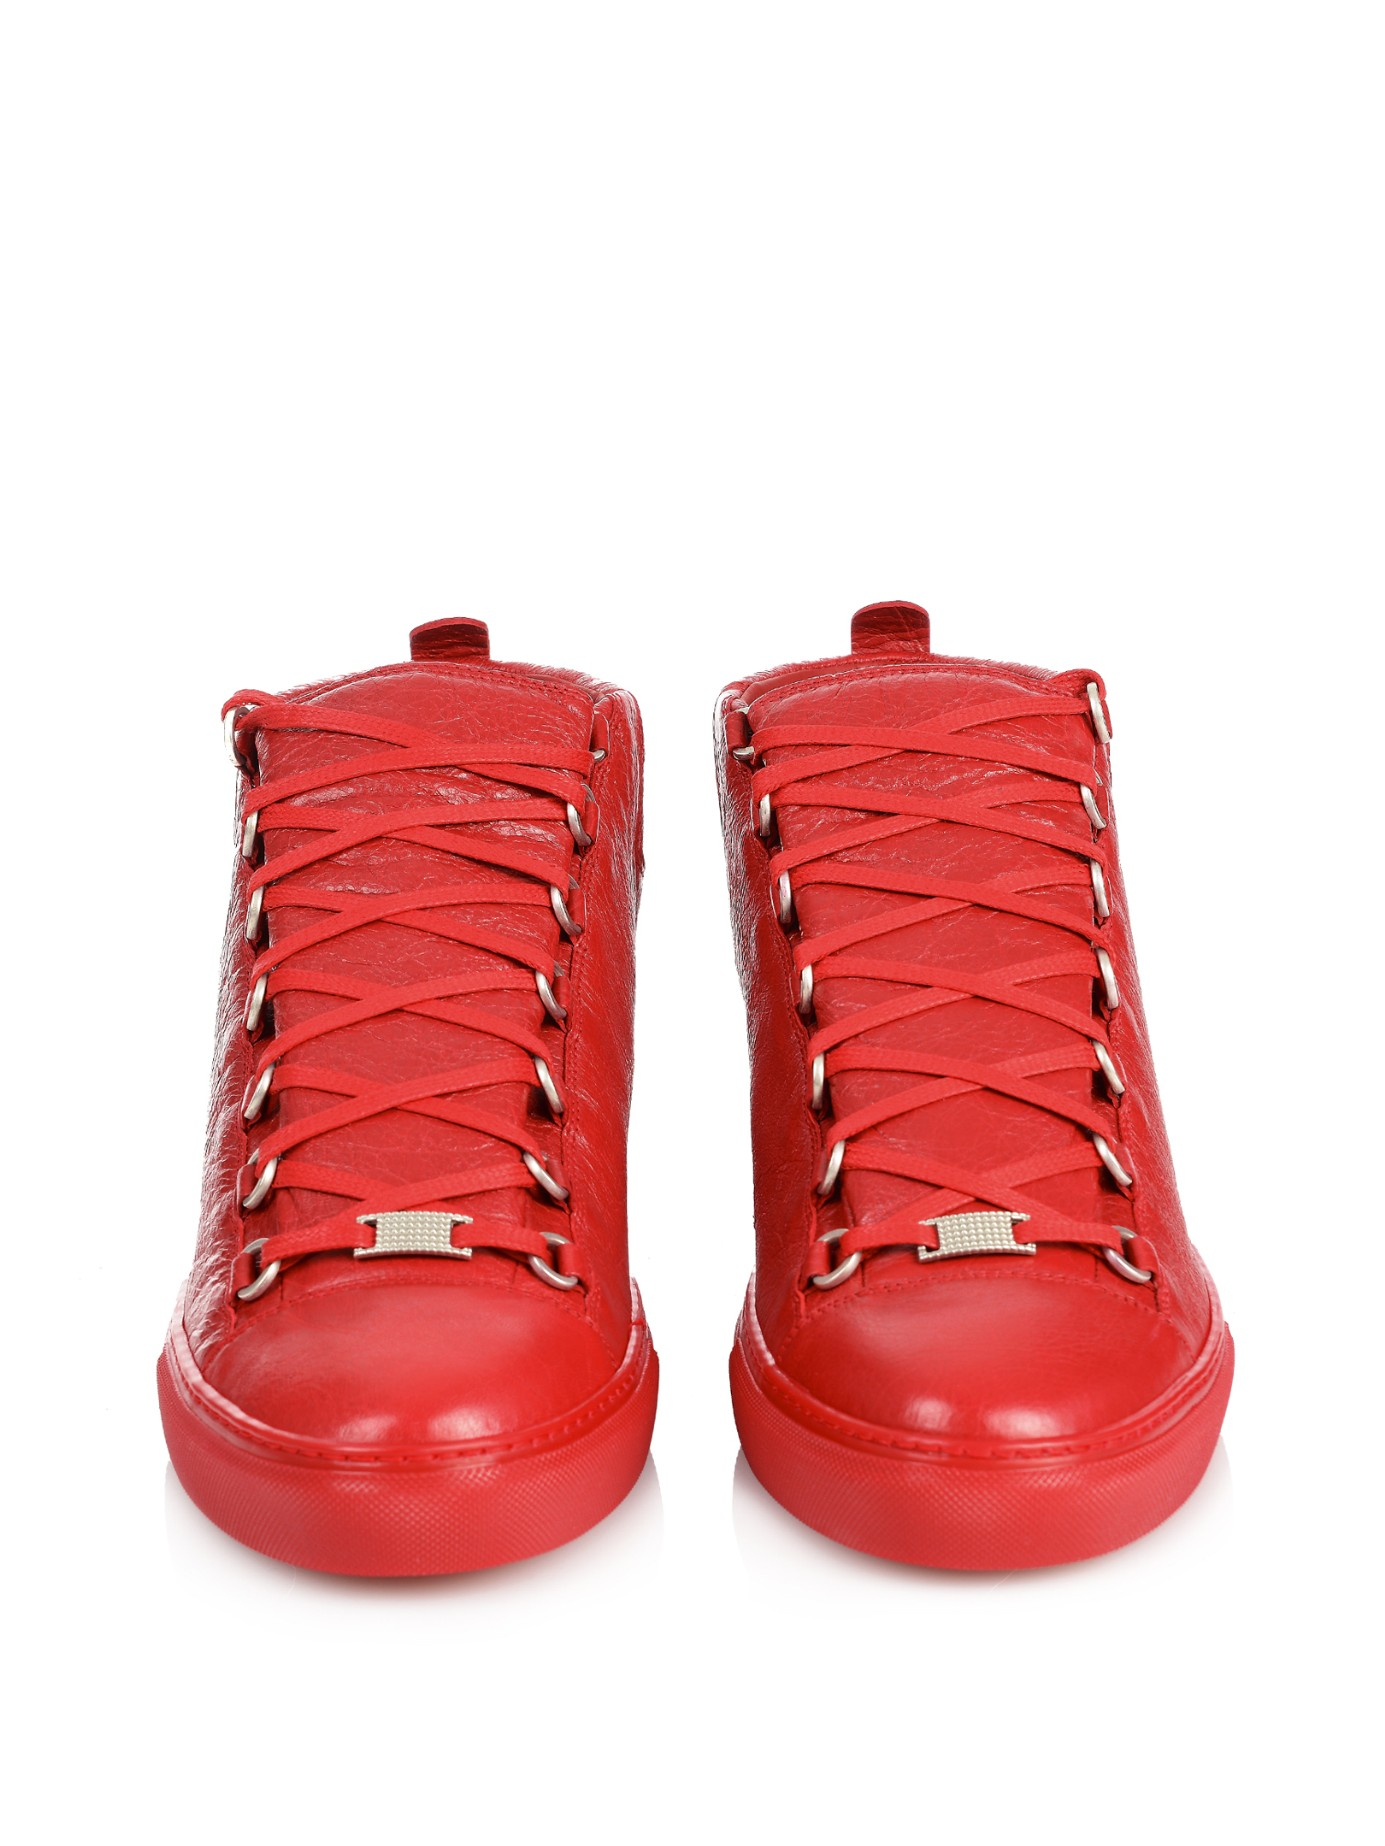 Lyst Balenciaga Arena HighTop Leather Sneakers in Red